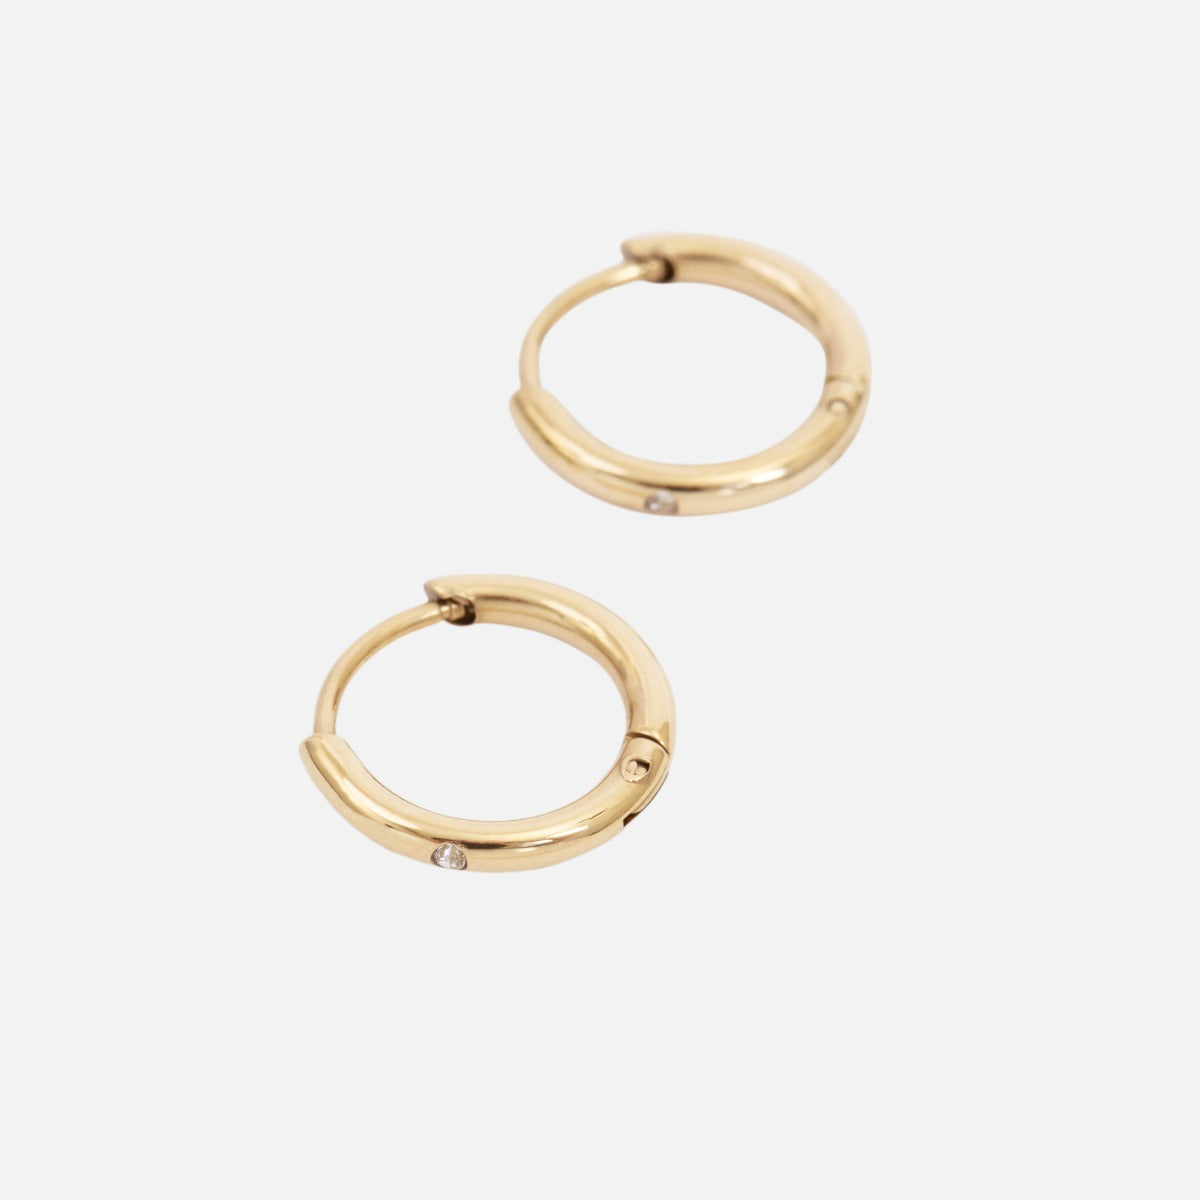 Stainless steel golden hoop earrings with stone insertion